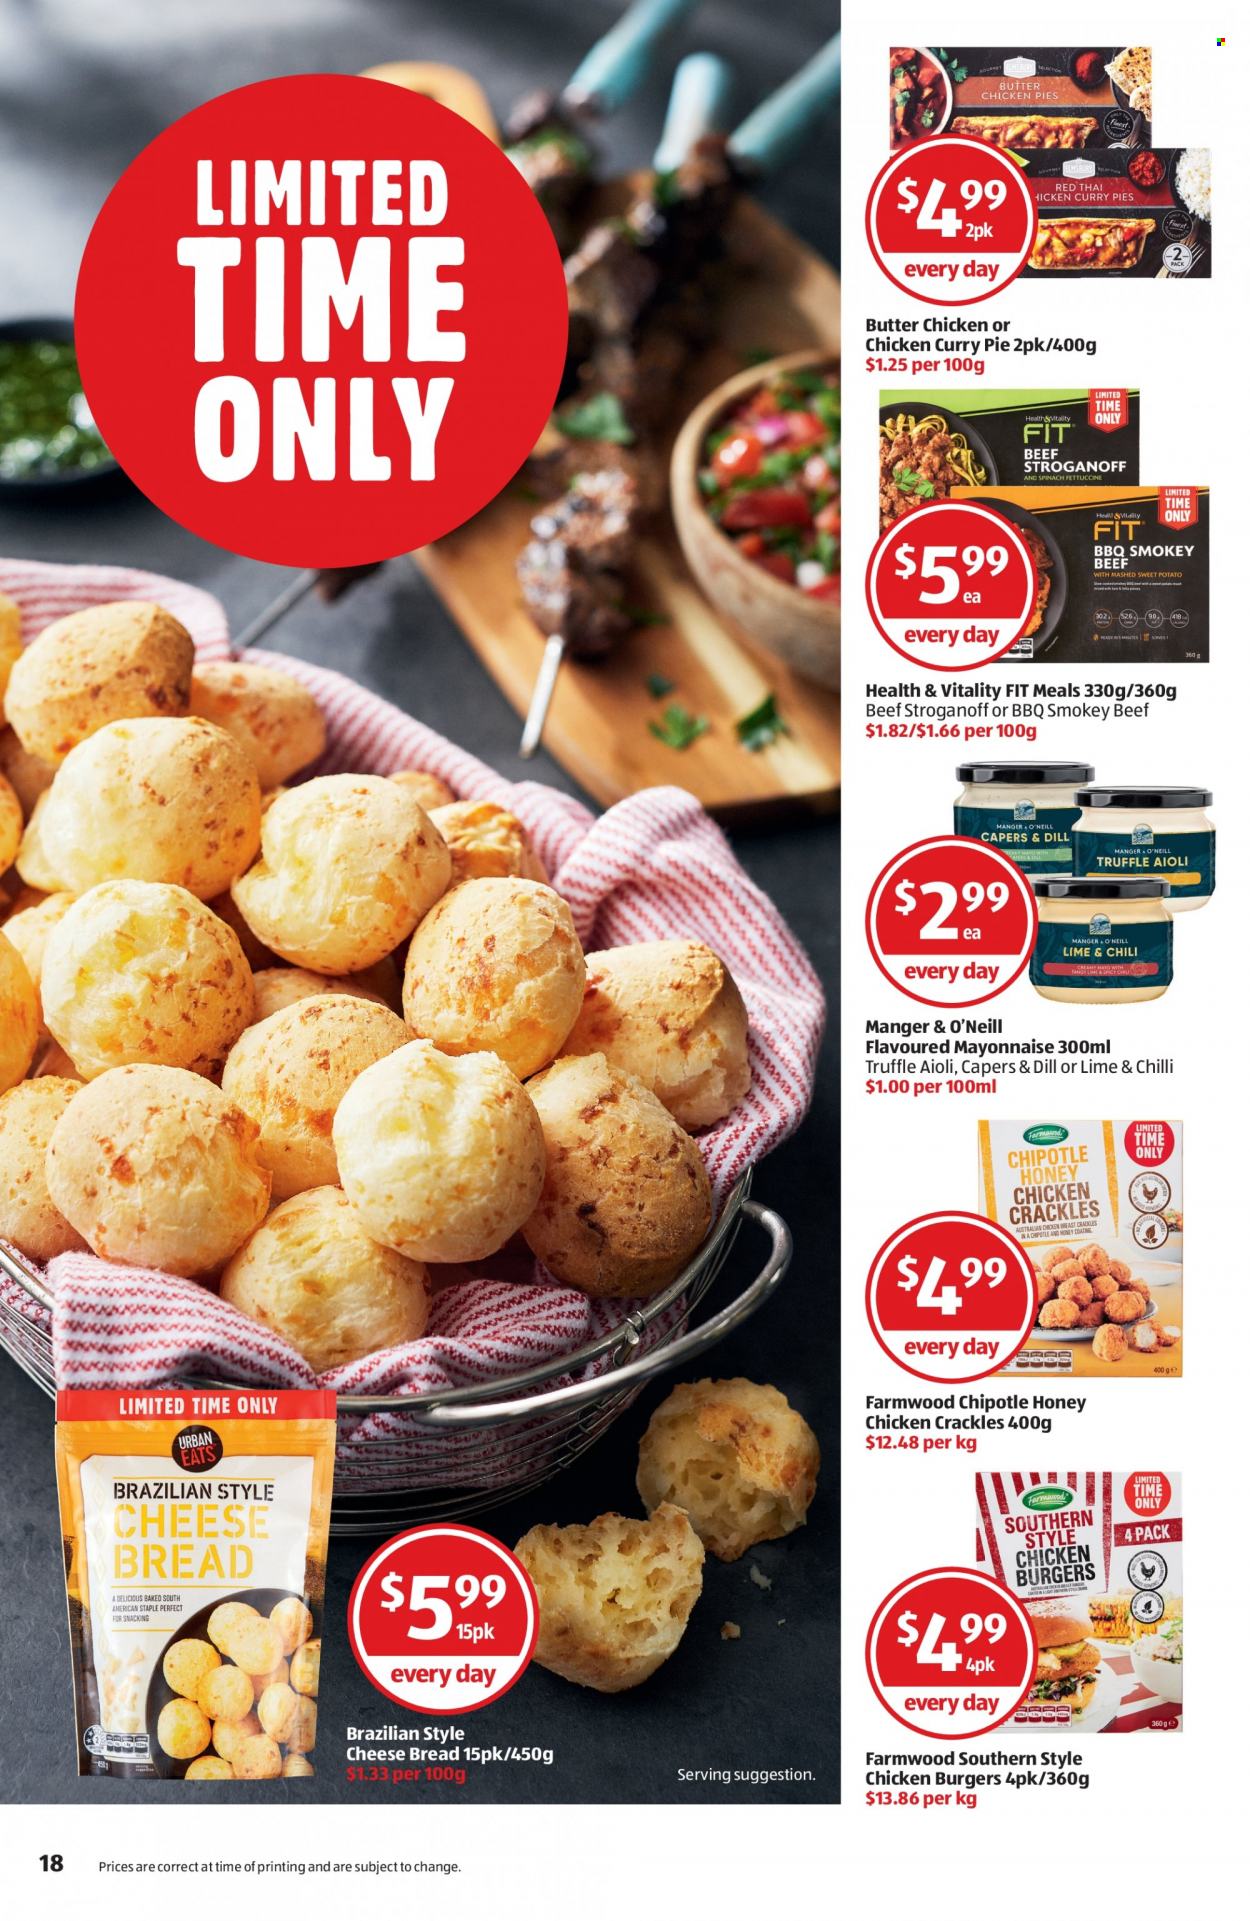 ALDI Catalogue - 19 May 2022 - 25 May 2022 - Sales products - bread, sweet potato, hamburger, chicken pies, cheese, mayonnaise, truffles, capers, dill, honey, chicken breasts, chicken meat, O‘Neill. Page 18.